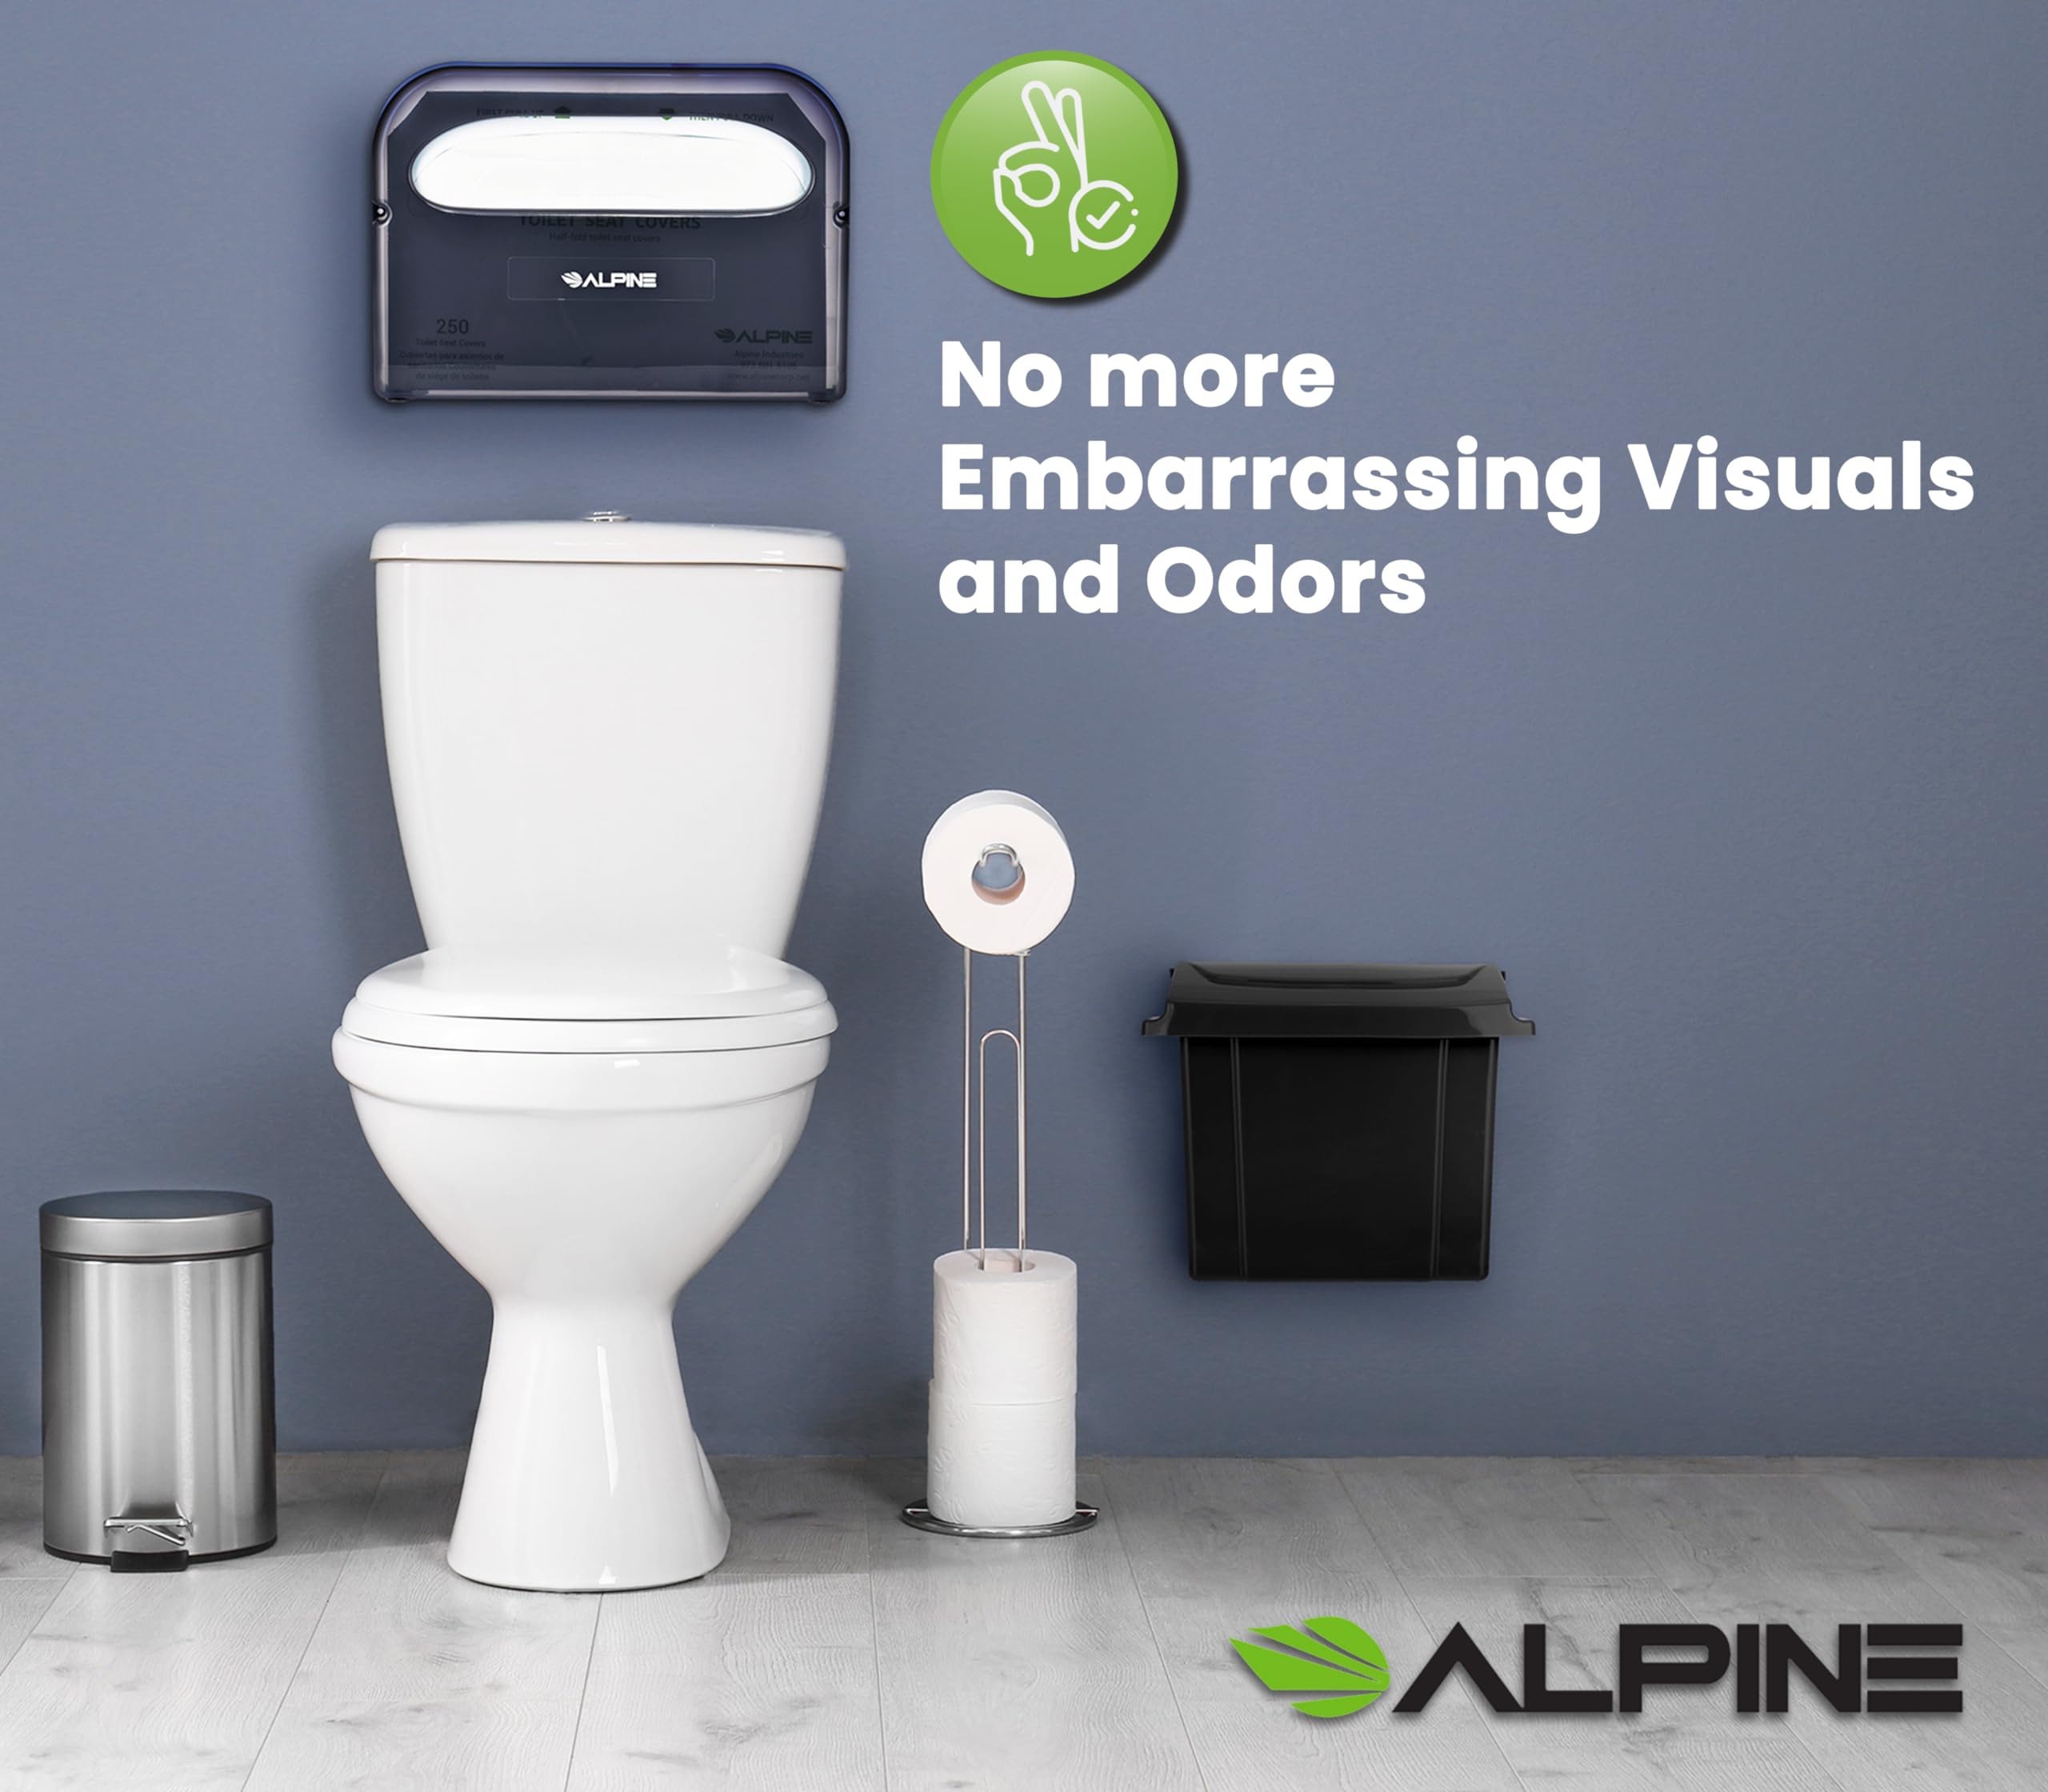 Alpine Sanitary Napkins Receptacle 5 x 9 x 12 in - Hygiene Products, Tampon & Waste Disposal Container - Durable ABS Plastic - Seals Tightly & Traps Odors -Easy Installation Hardware Included  - Like New